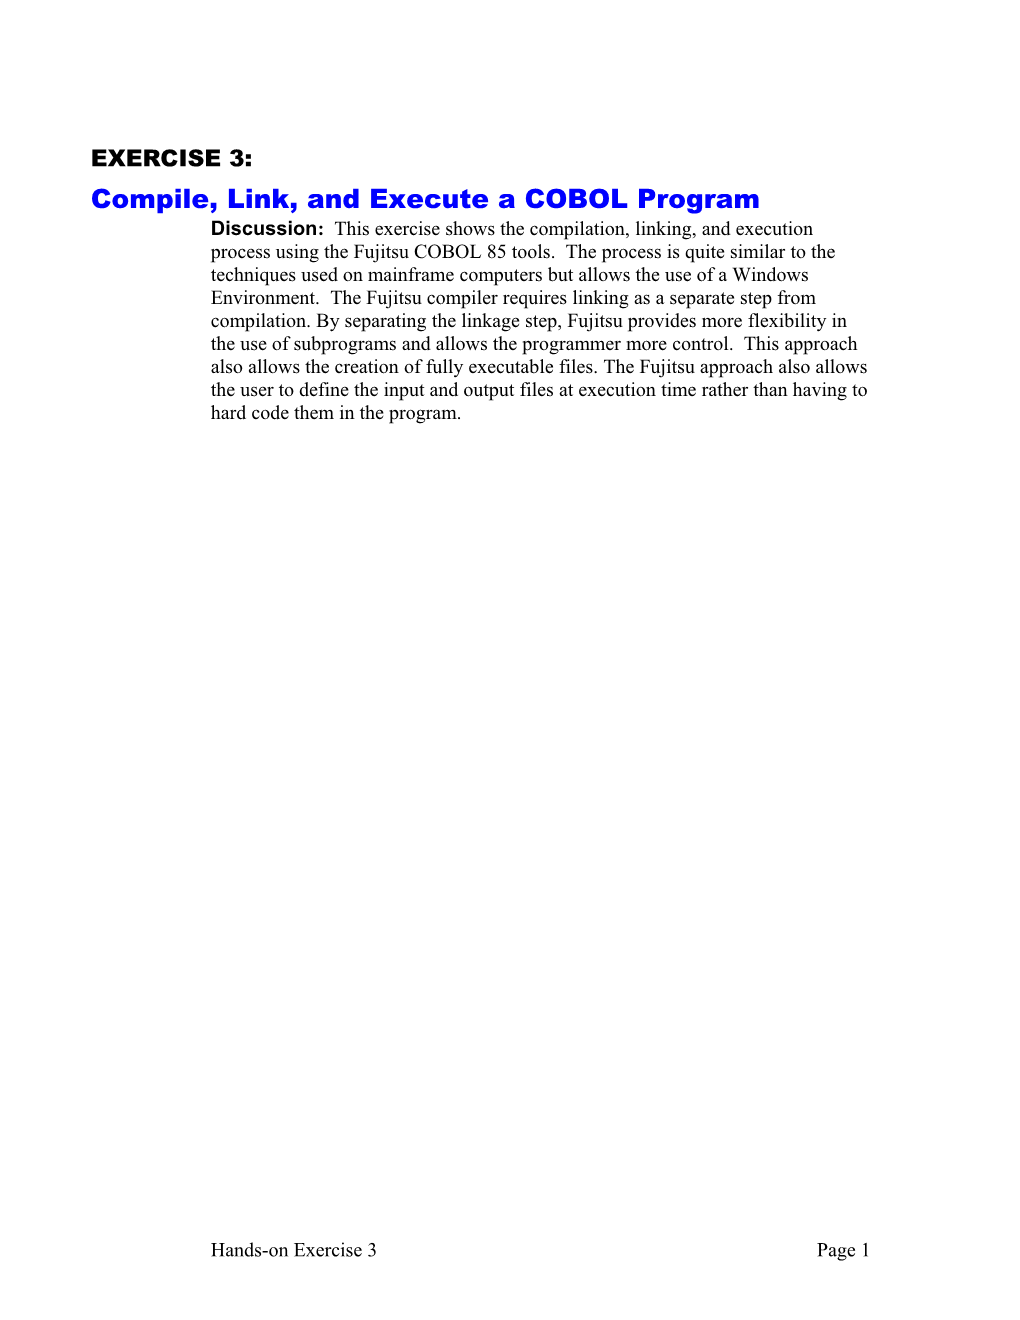 Compile, Link, and Execute a COBOL Program